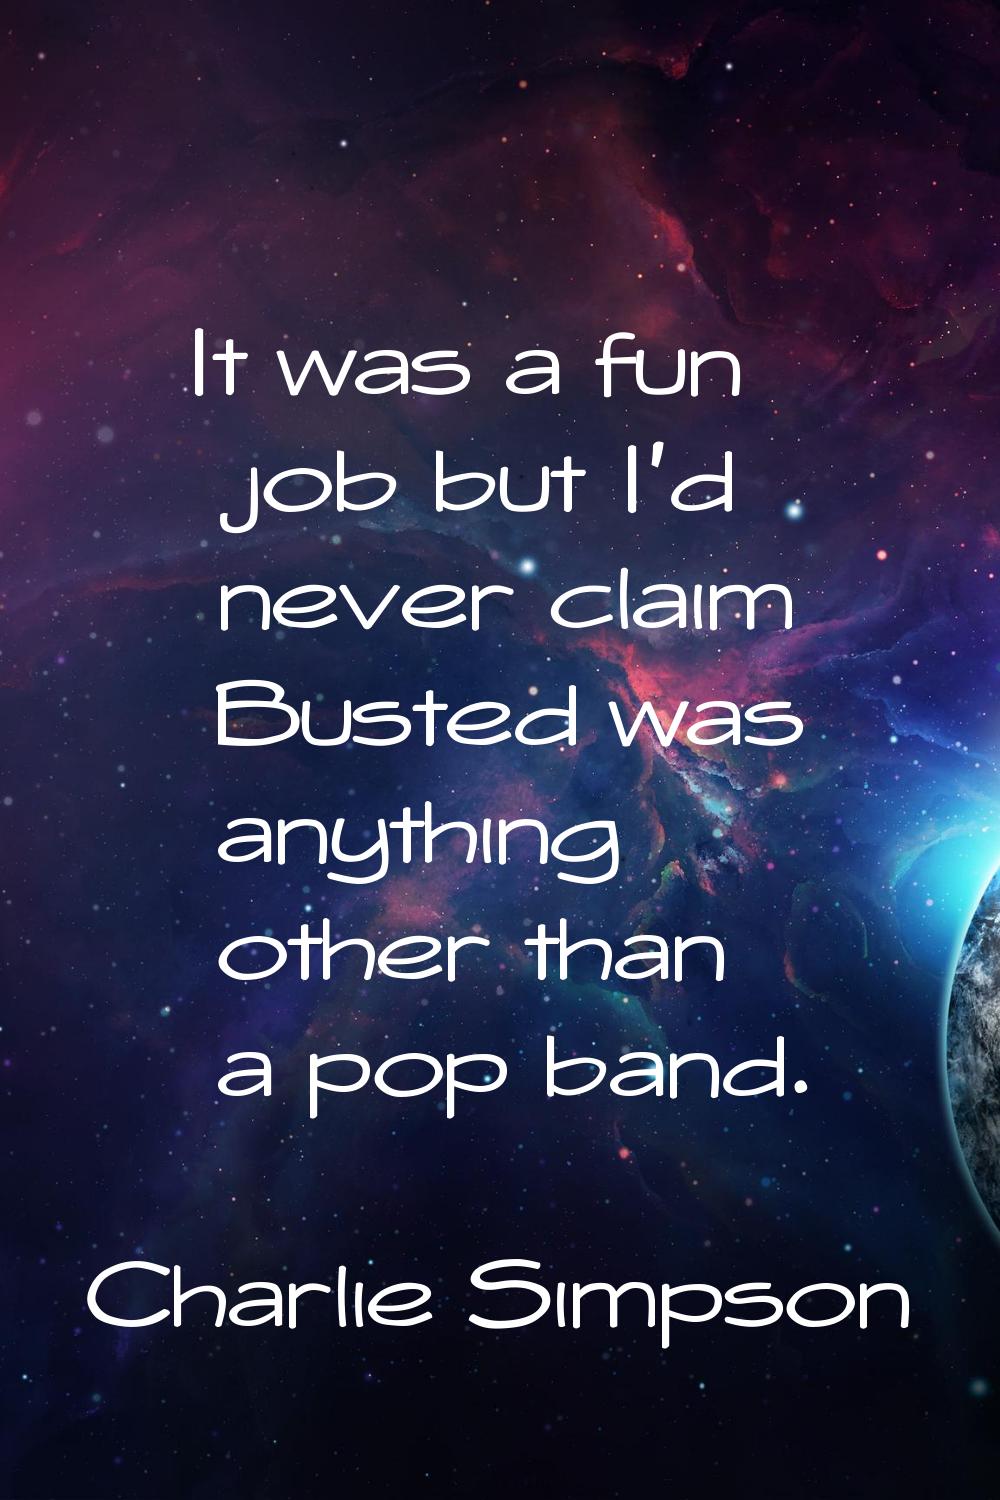 It was a fun job but I'd never claim Busted was anything other than a pop band.